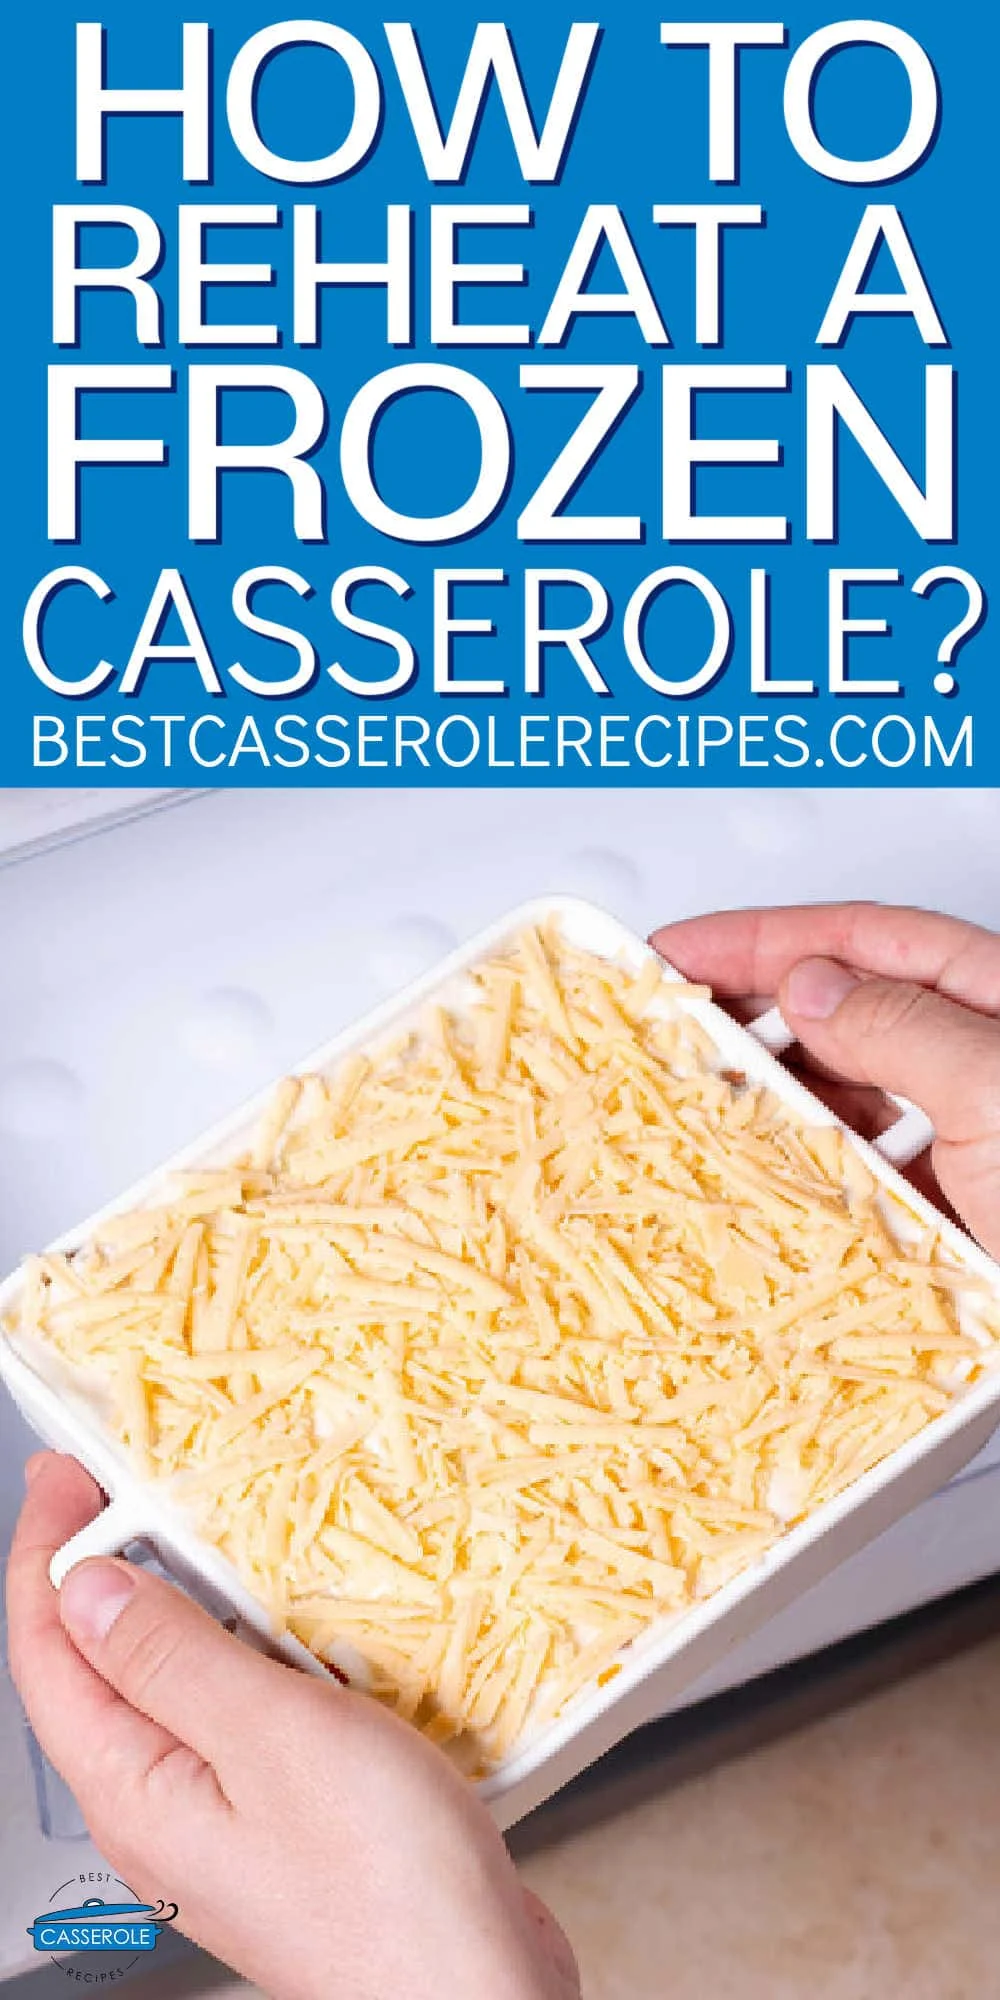 casserole dish with two hands over a freezer drawer with text "how to reheat a frozen casserole"